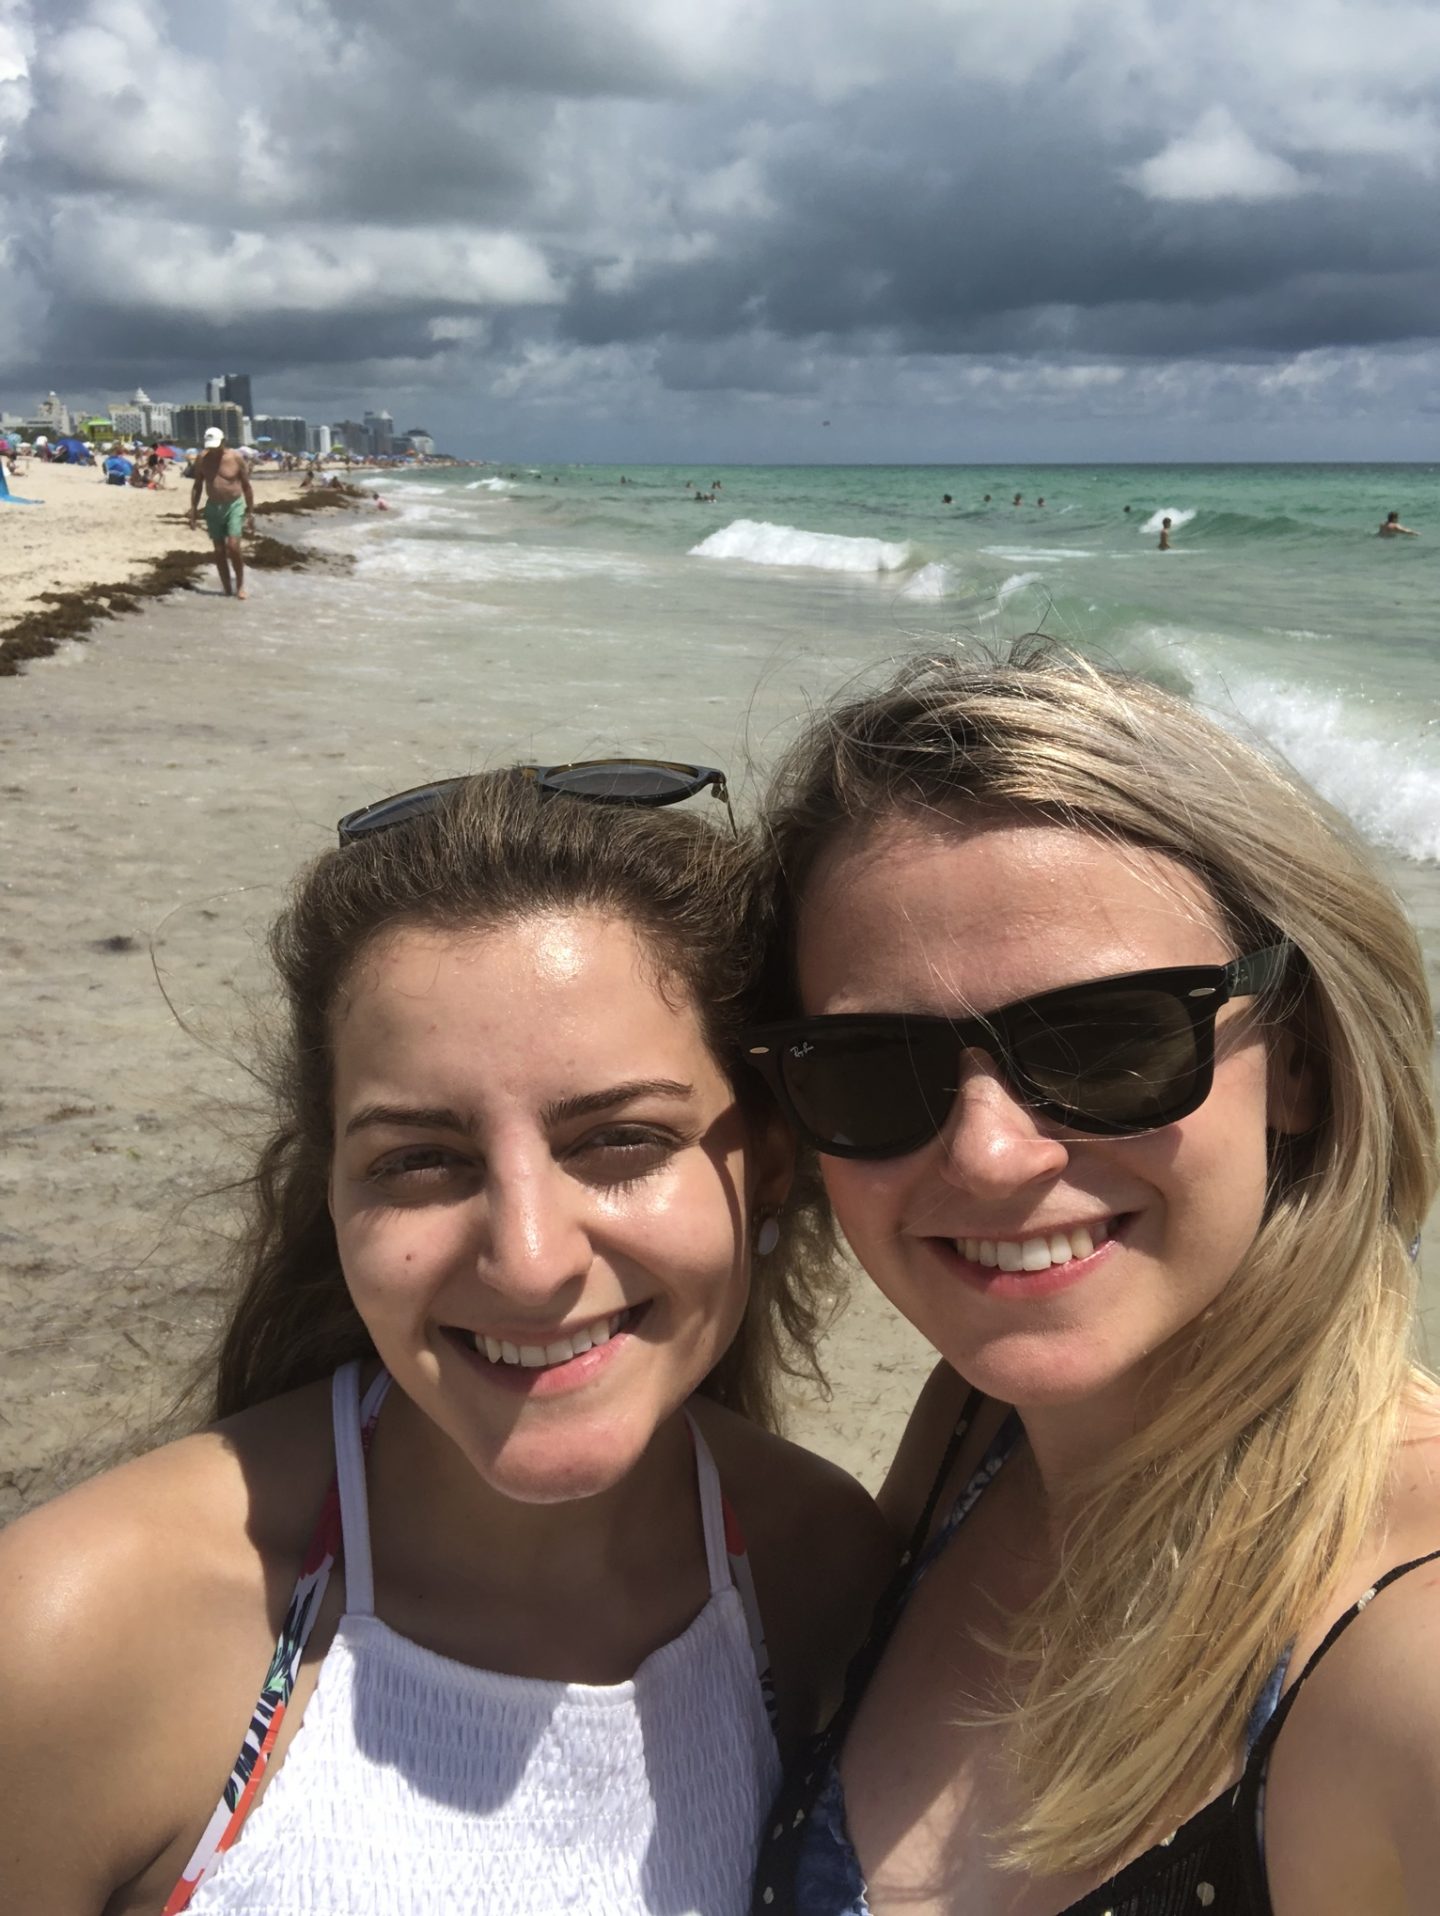 Girls at the beach in Miami, Florida